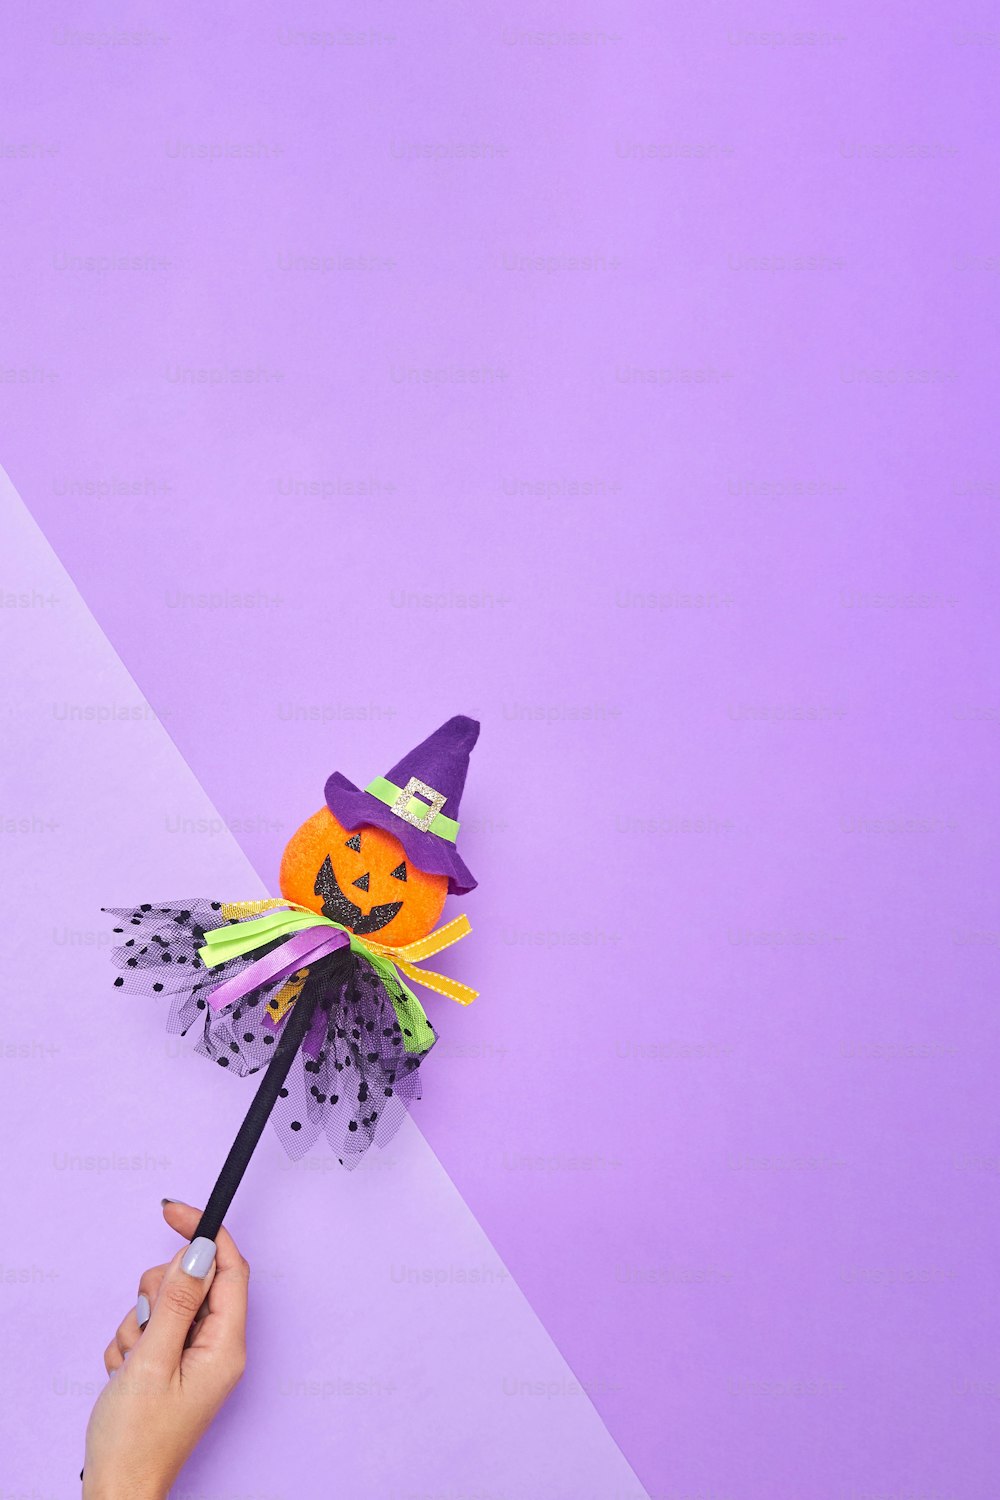 a person holding a broom with a halloween decoration on it